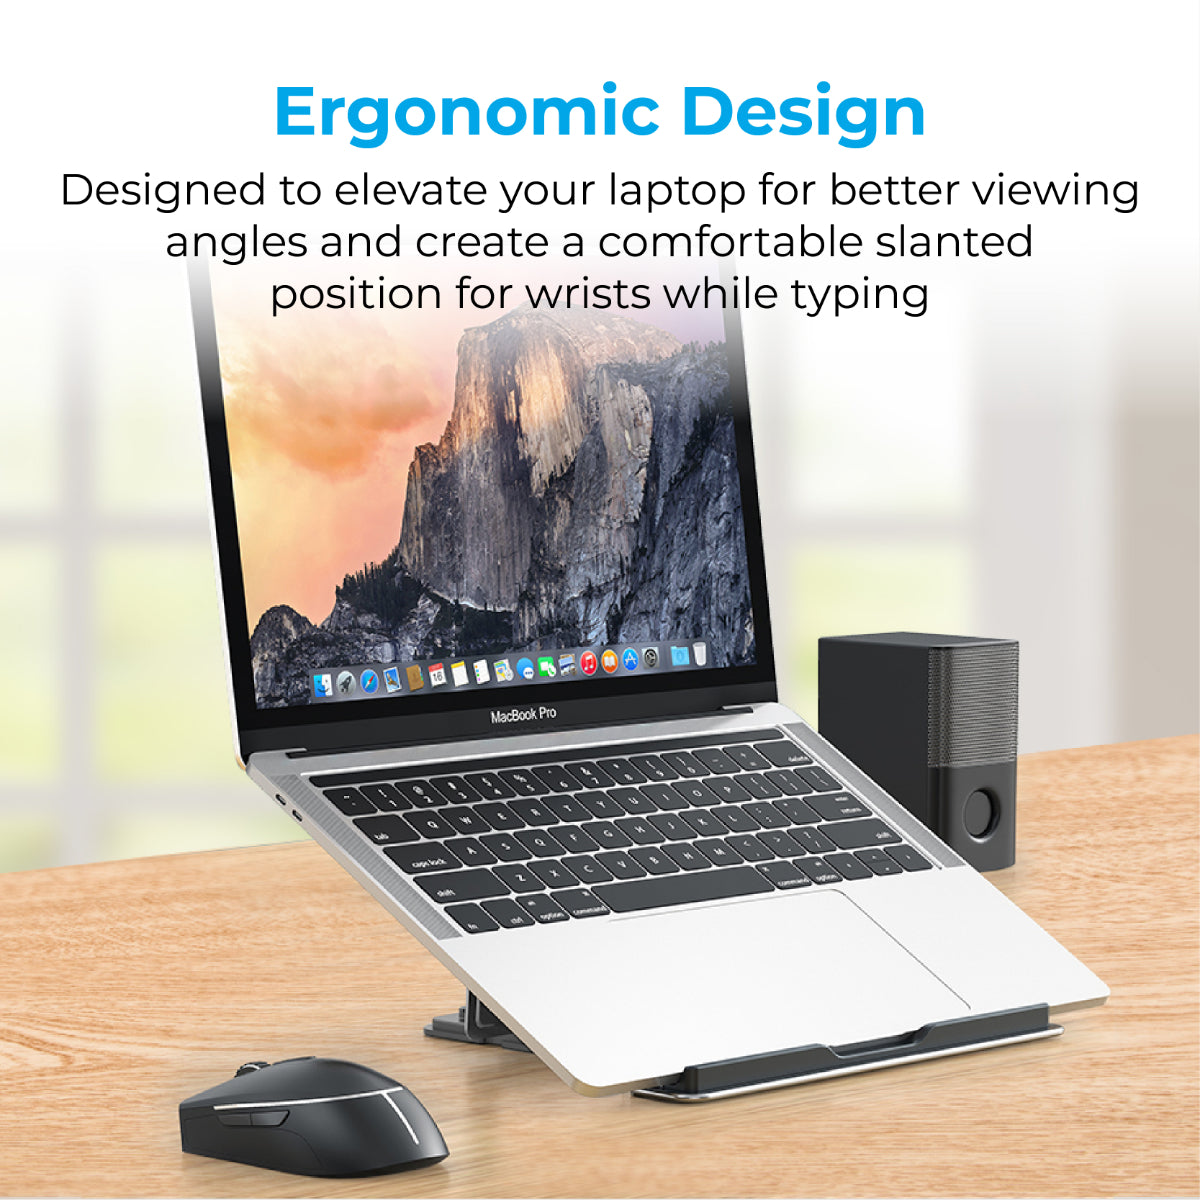 Promate Laptop Stand, Ergonomic Aluminum Multi-Level Notebook Stand up to 17 Inches with Anti-Slip Pads, Heat Dissipating and Foldable Design for MacBook Pro, Laptops, Tablets, Notebooks, DeskMate-5 Grey